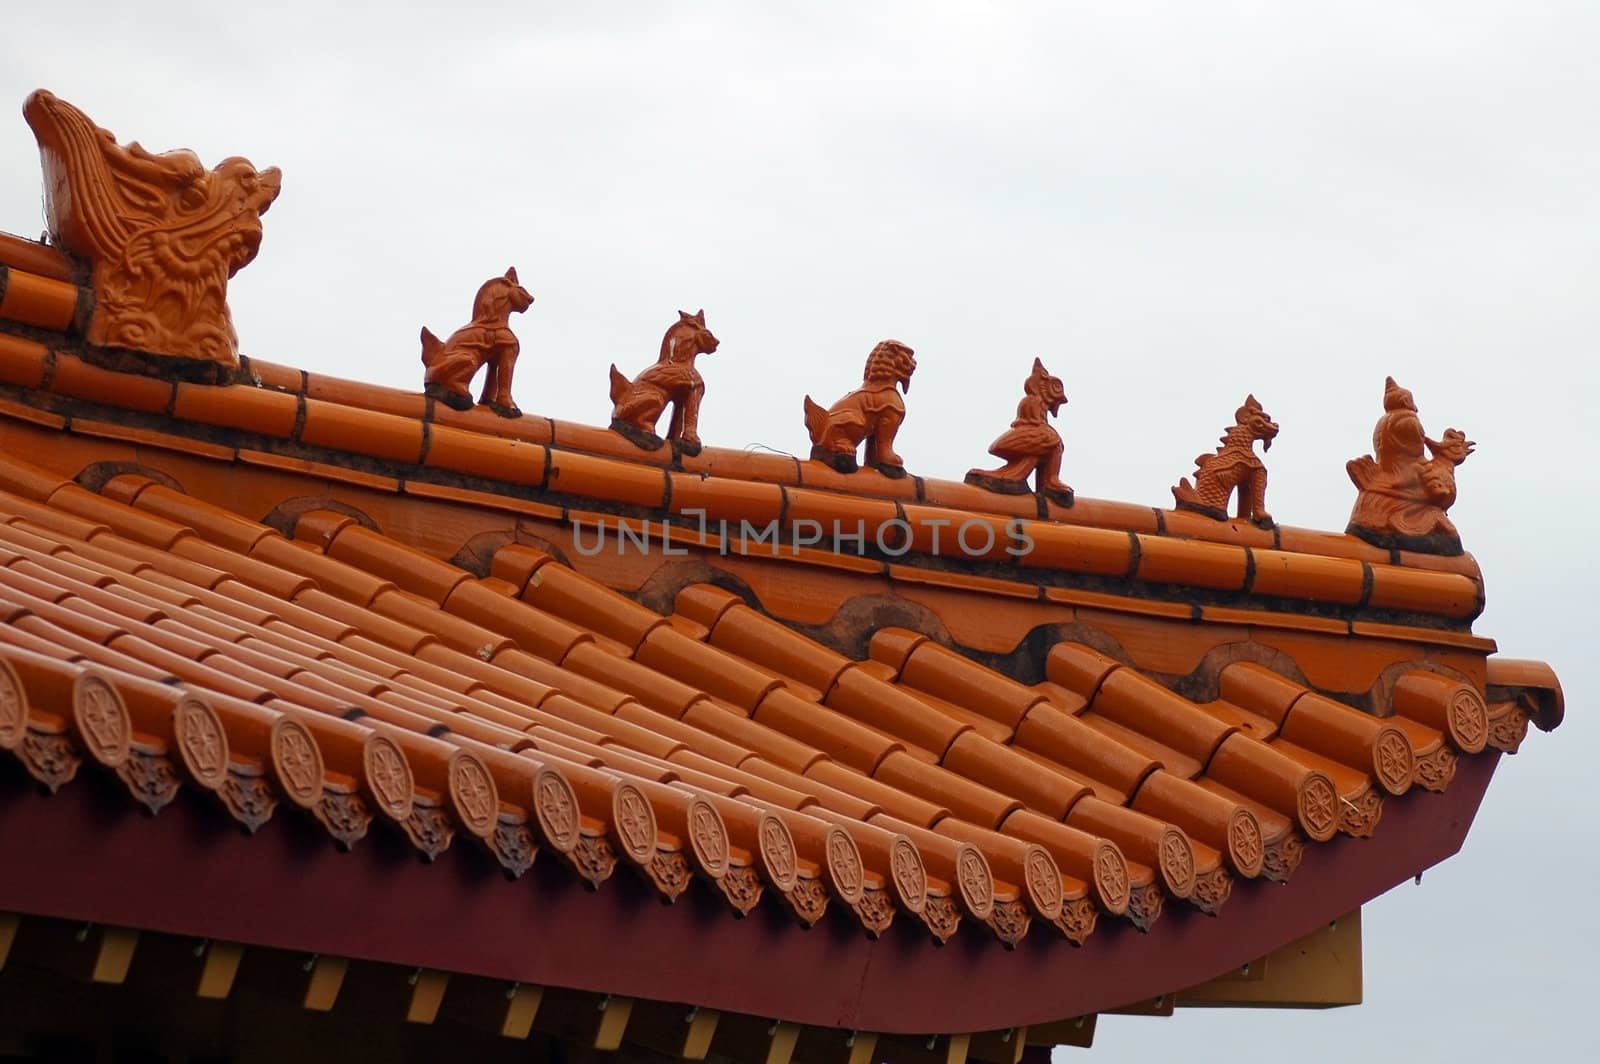 budhist temple detail by rorem